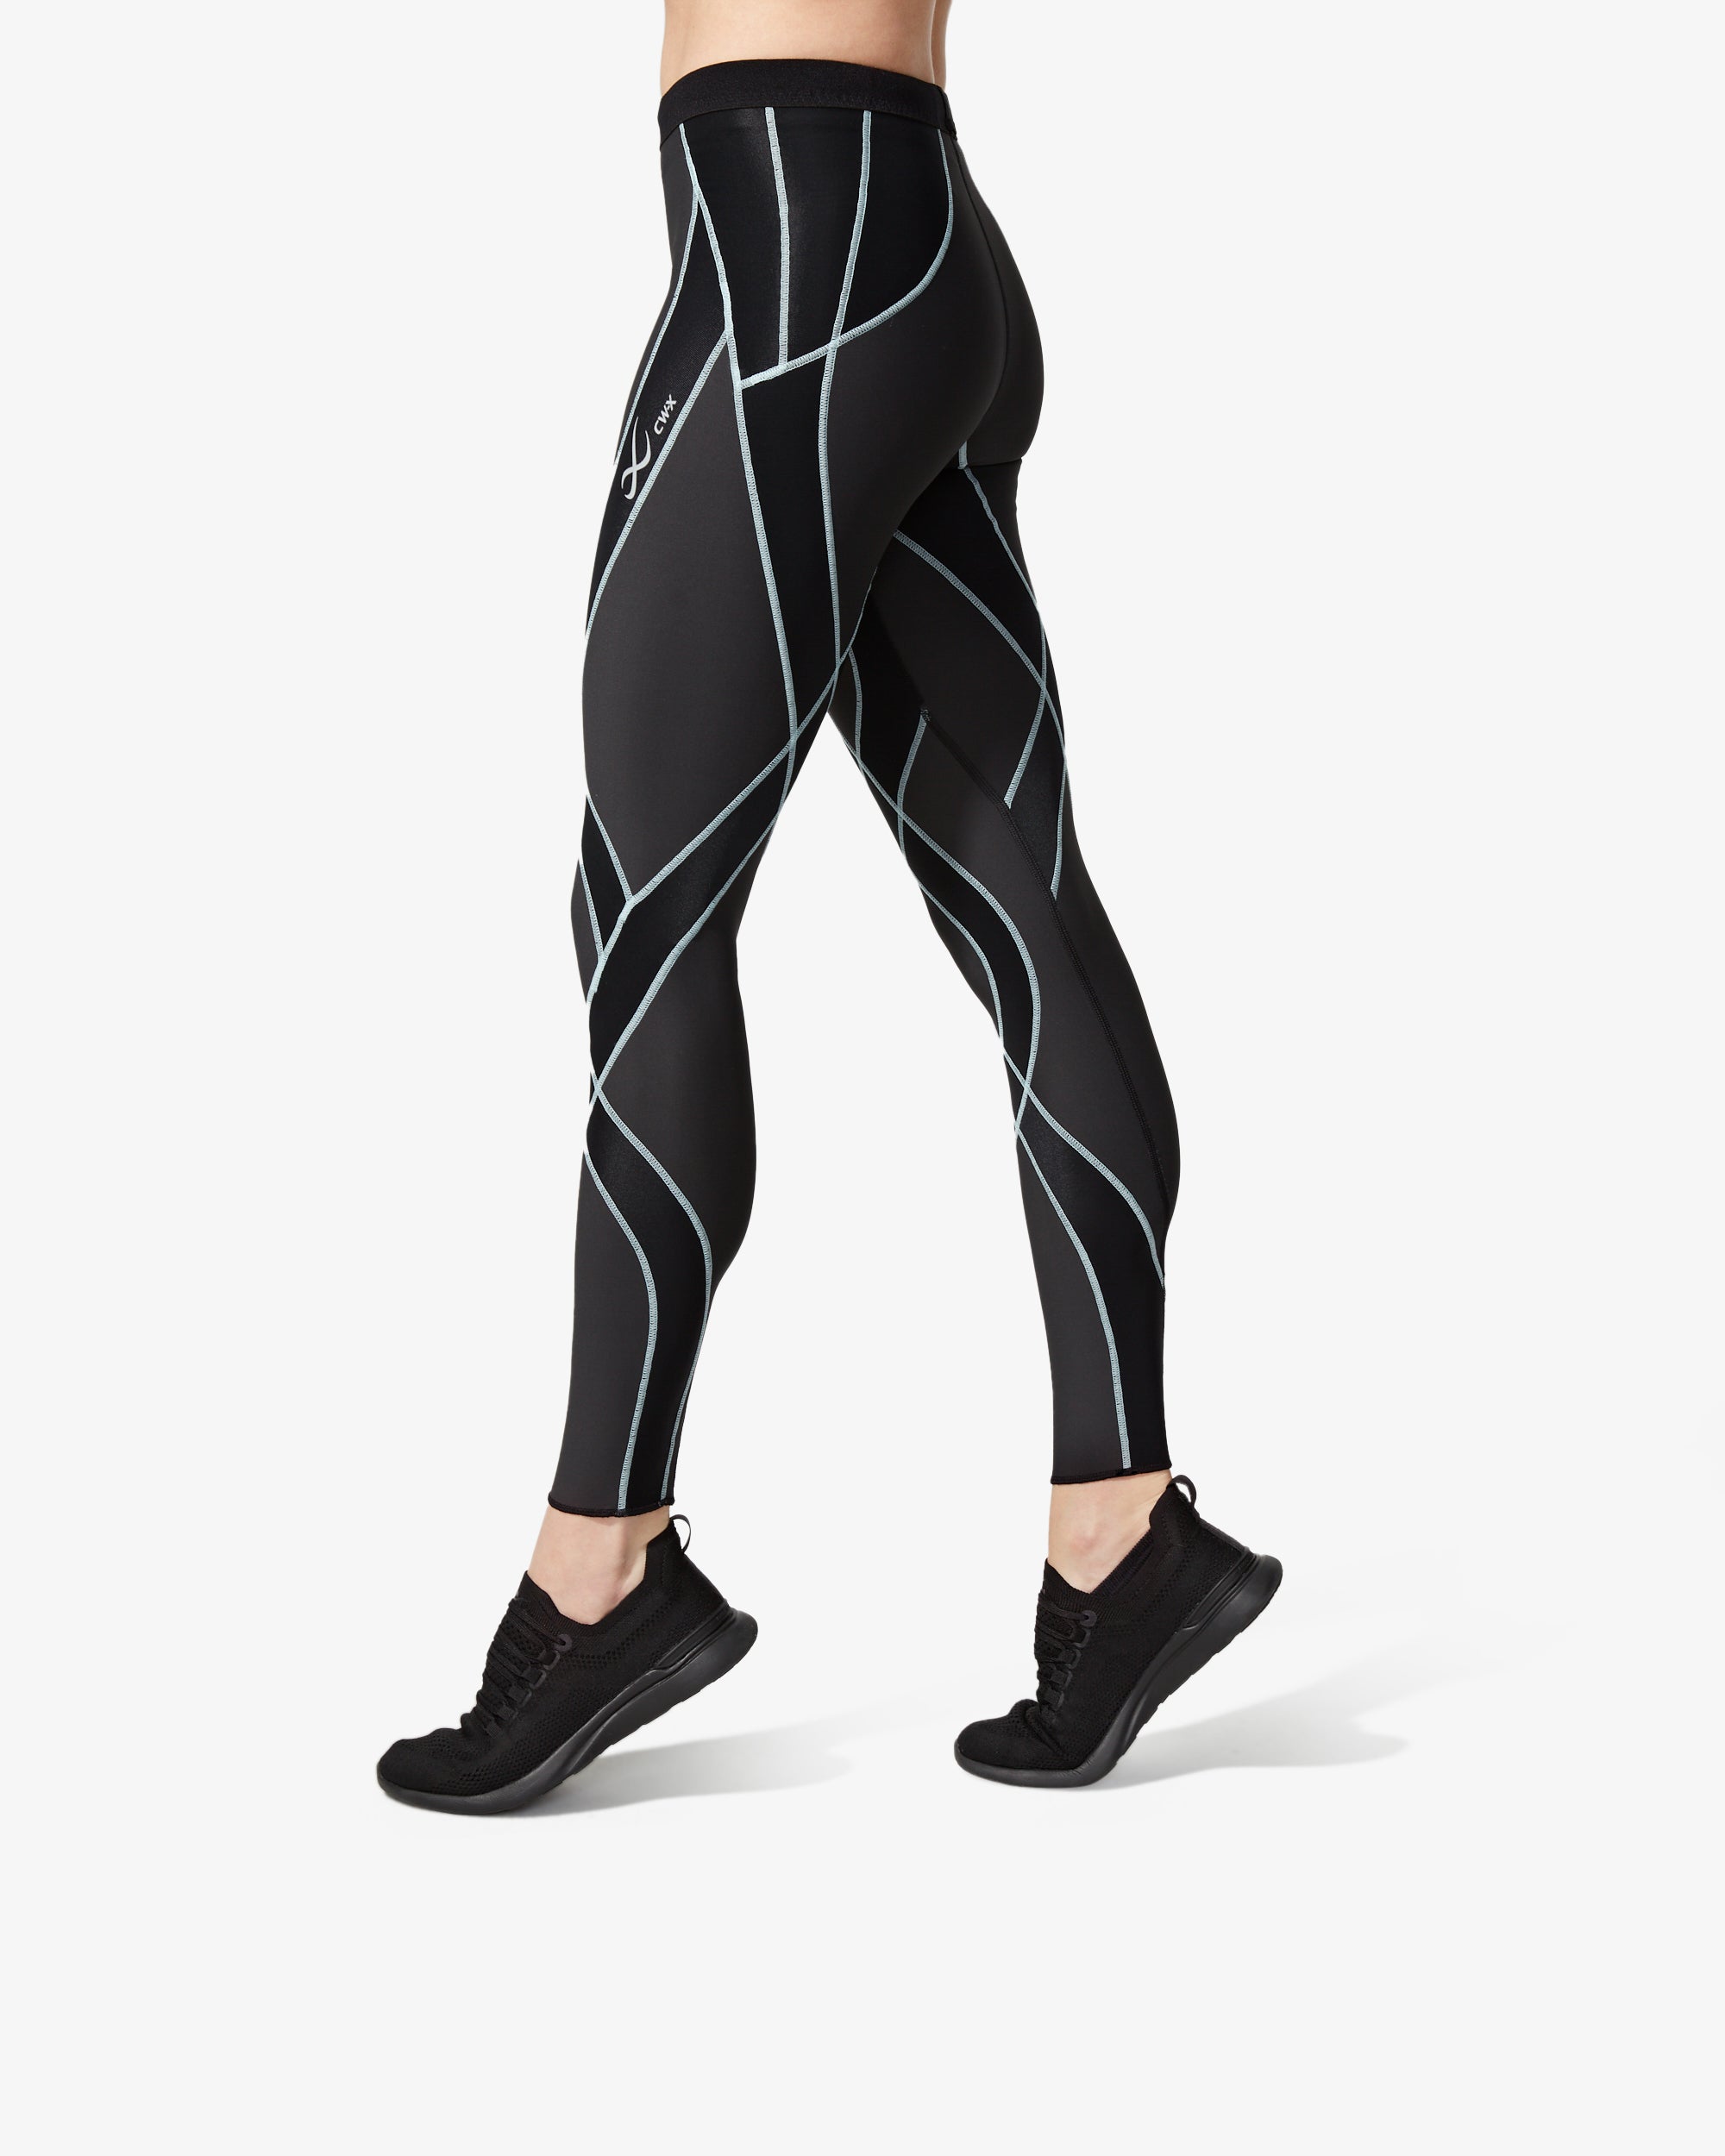 CW-X Women's Endurance Generator Insulator Joint and Muscle Support 3/4  Compression Tight